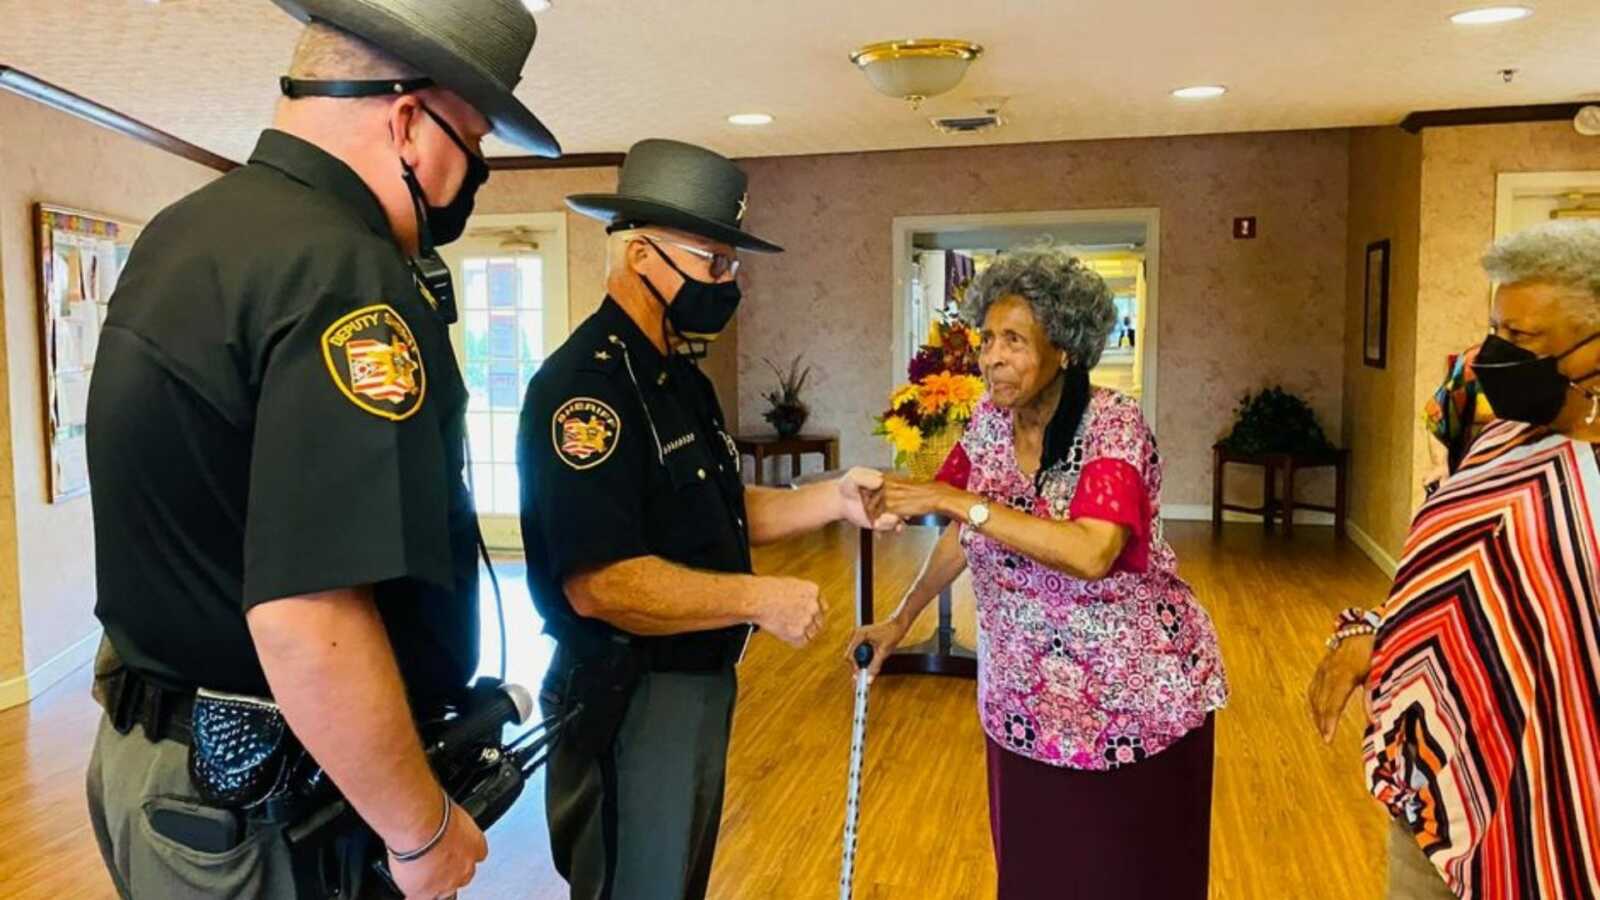 officers visiting the lady who complimented the officer for helping her fix her car